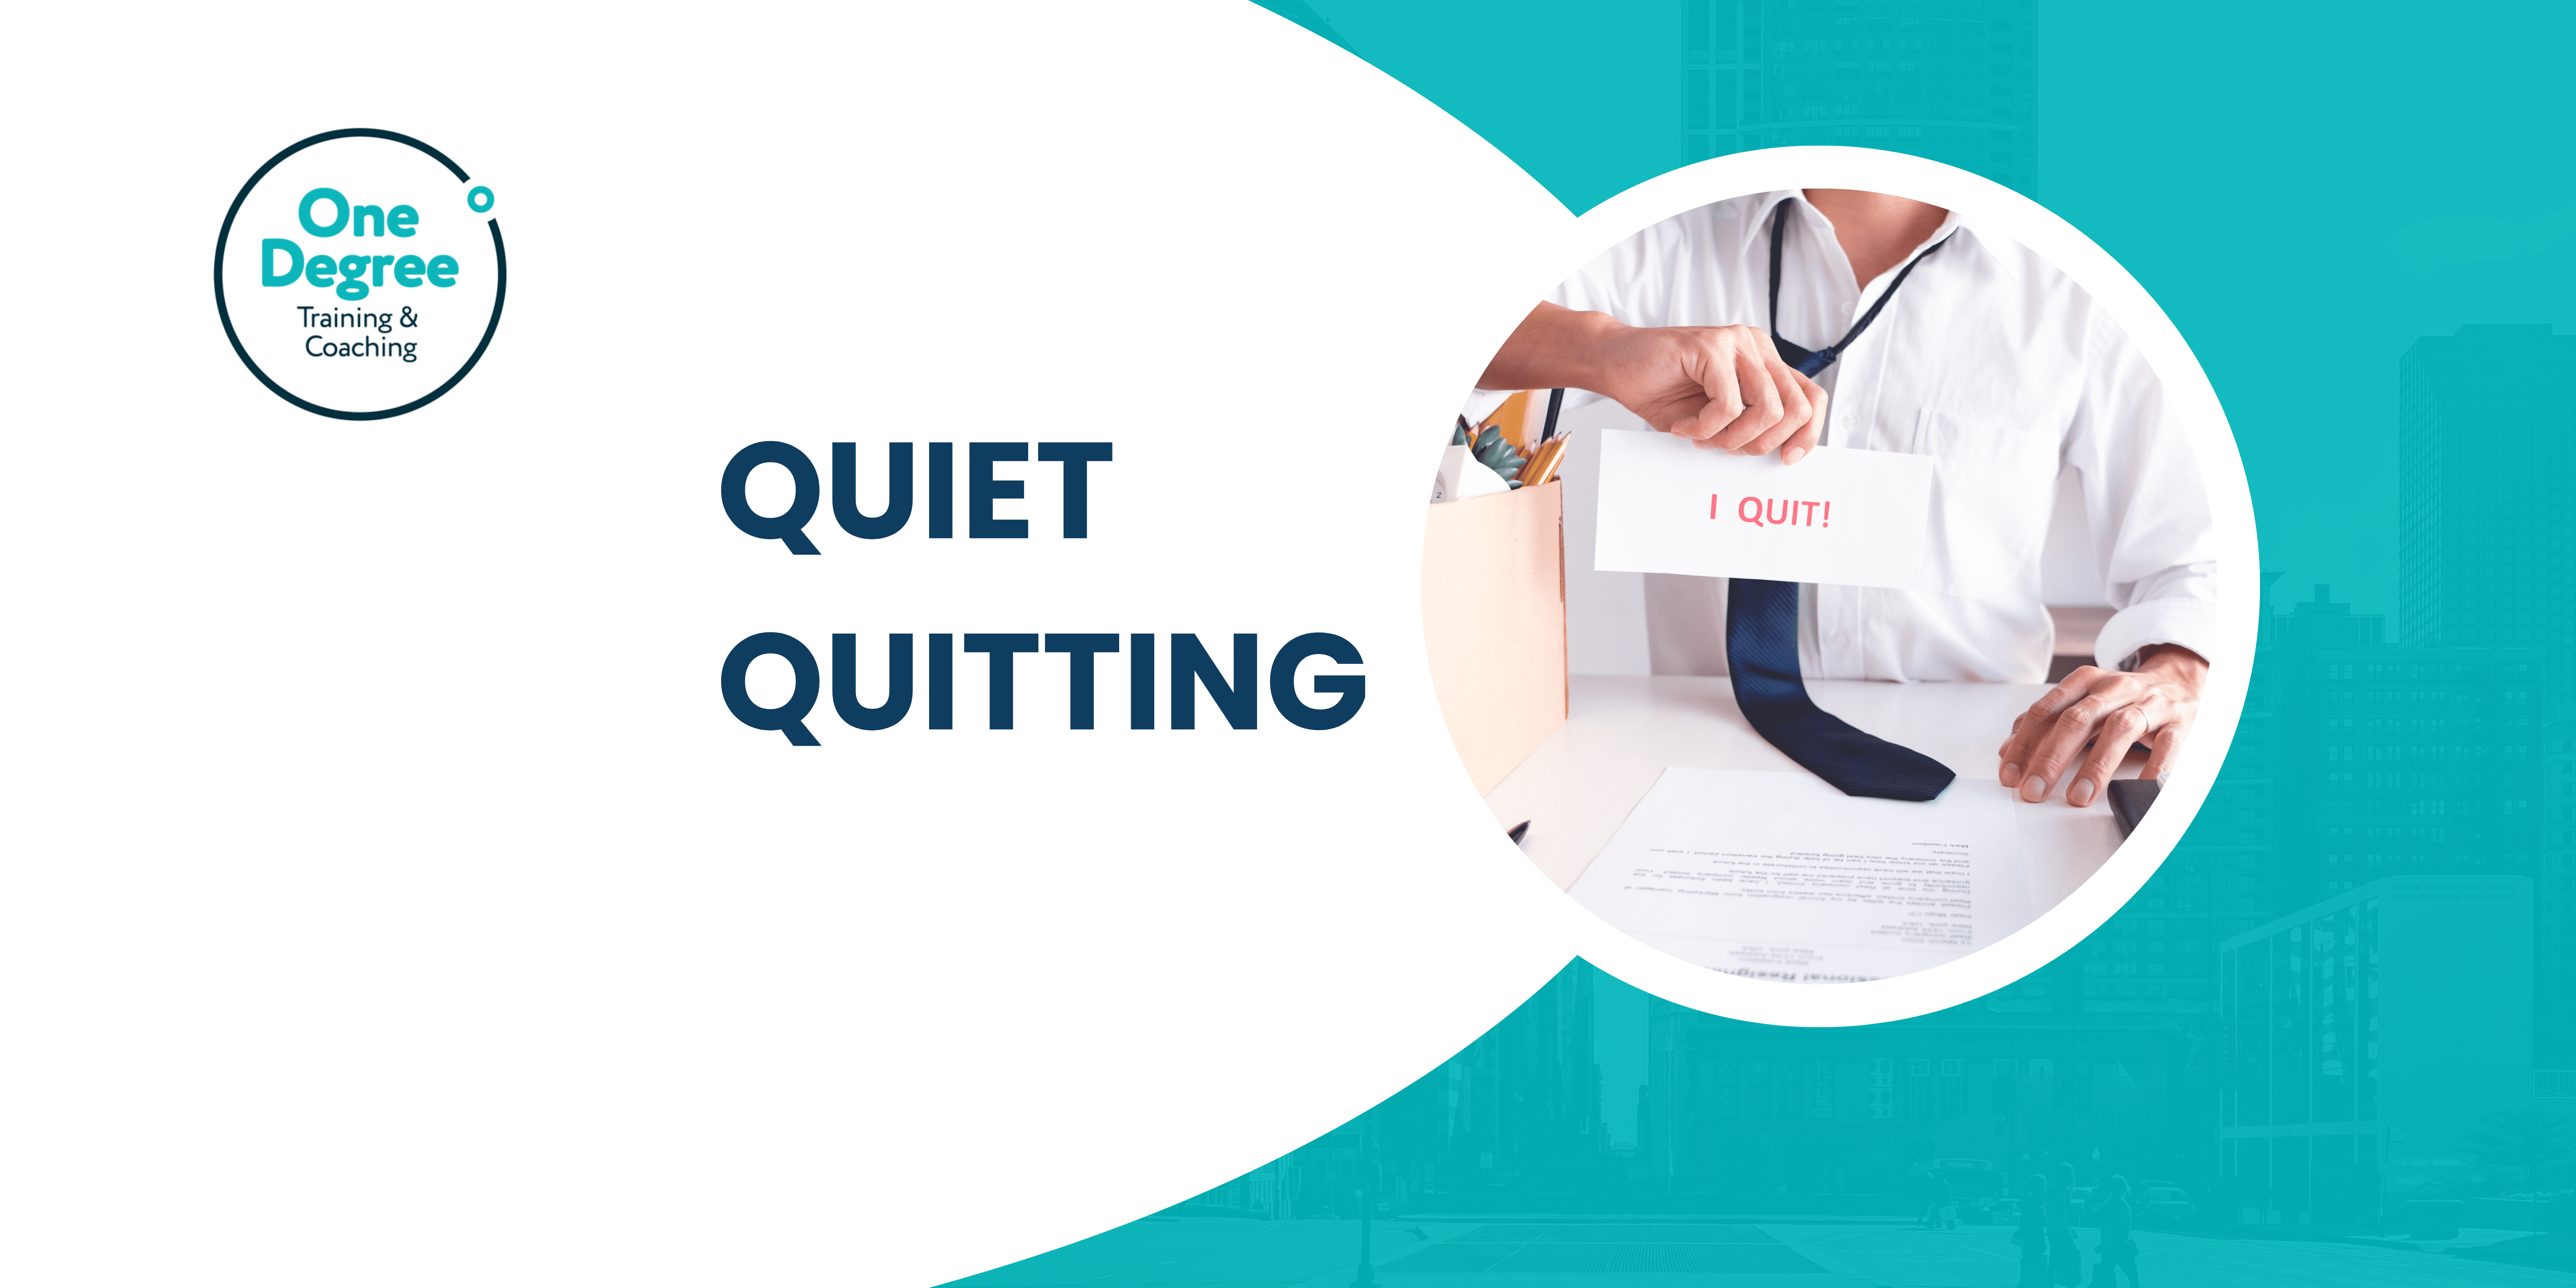 Quiet Quitting: A Poor Attitude, or a Failure of Leadership?